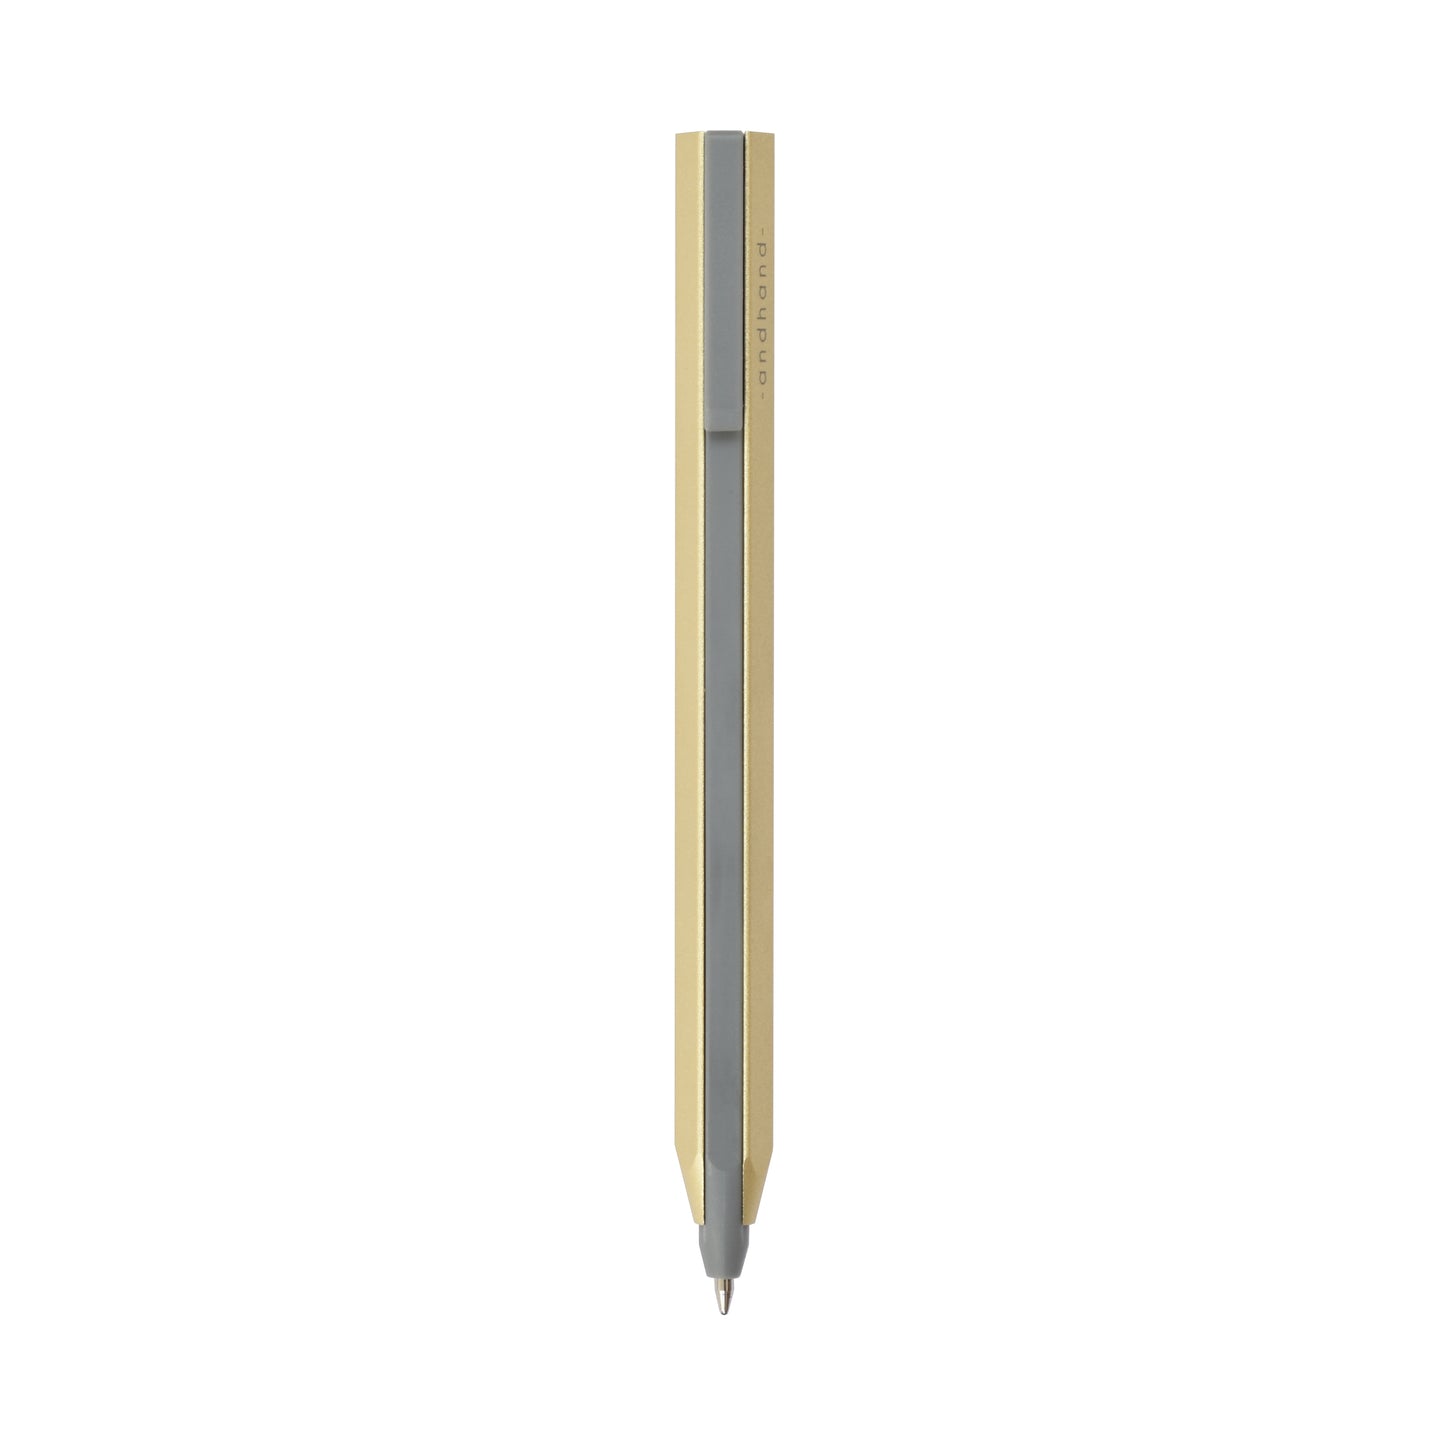 Core retractable pen is elegantly minimal in design and has been crafted from a durable palette of materials. Unique retracting mechanism and stylish gold finish.